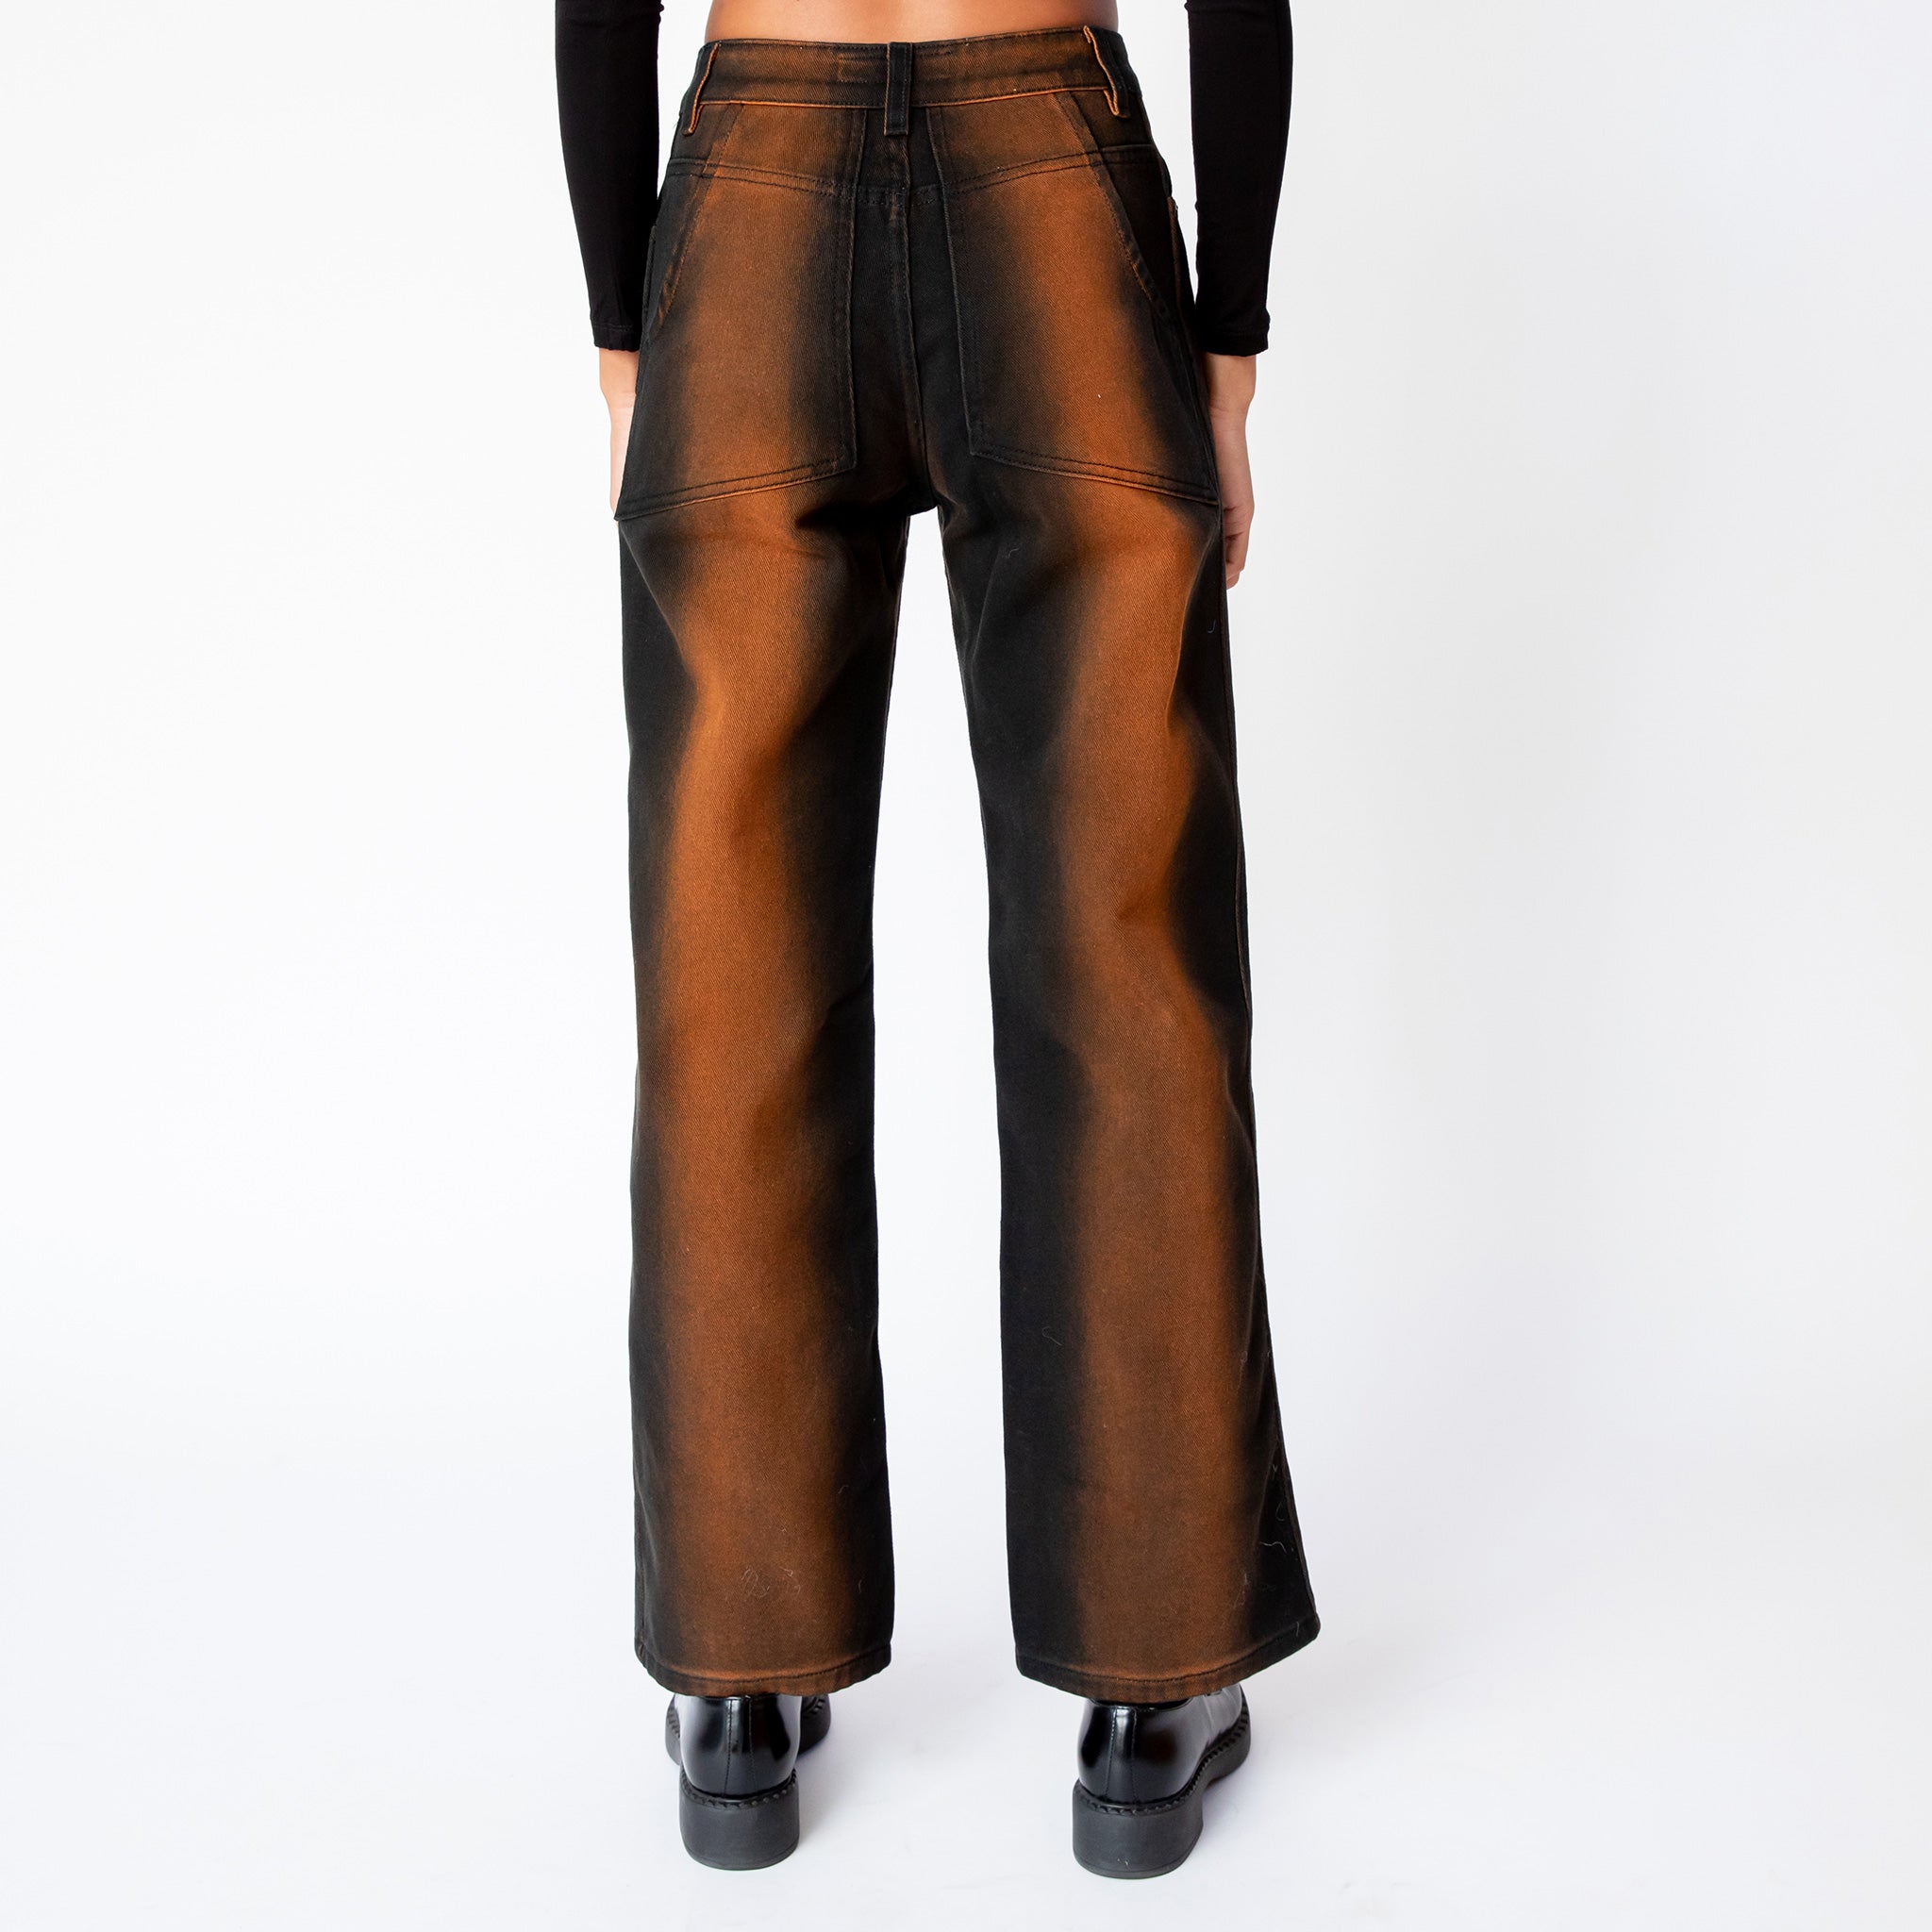 Back view of the Eckhaus Latta's wide leg jeans in ozone, featuring a vertical stripe of rust brown that gradients to black along the sides of the leg.